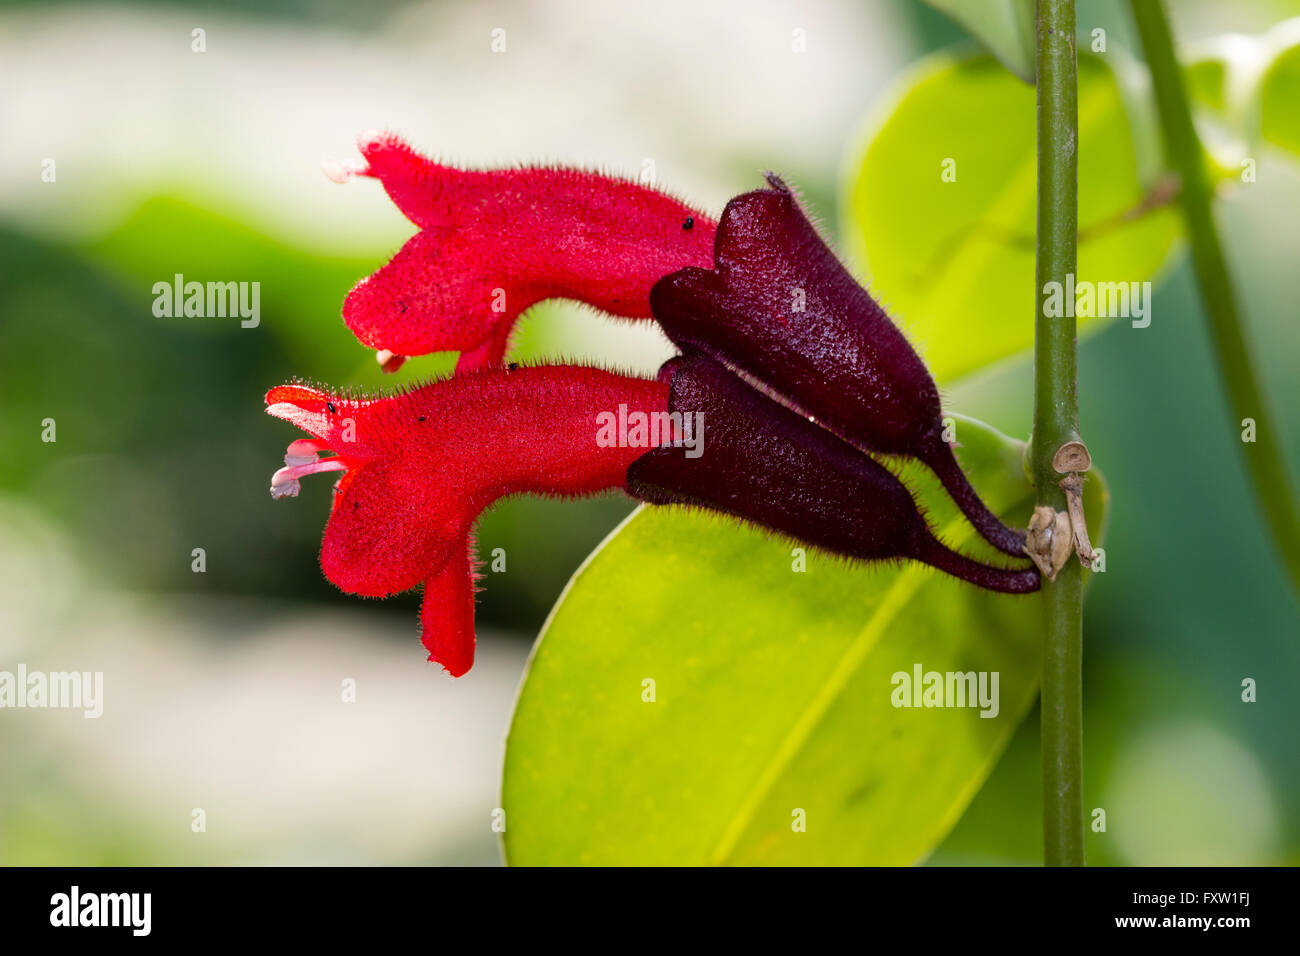 Twinned red flowers of the ornamental tropical lipstick vine, Aeschynanthus radicans Stock Photo